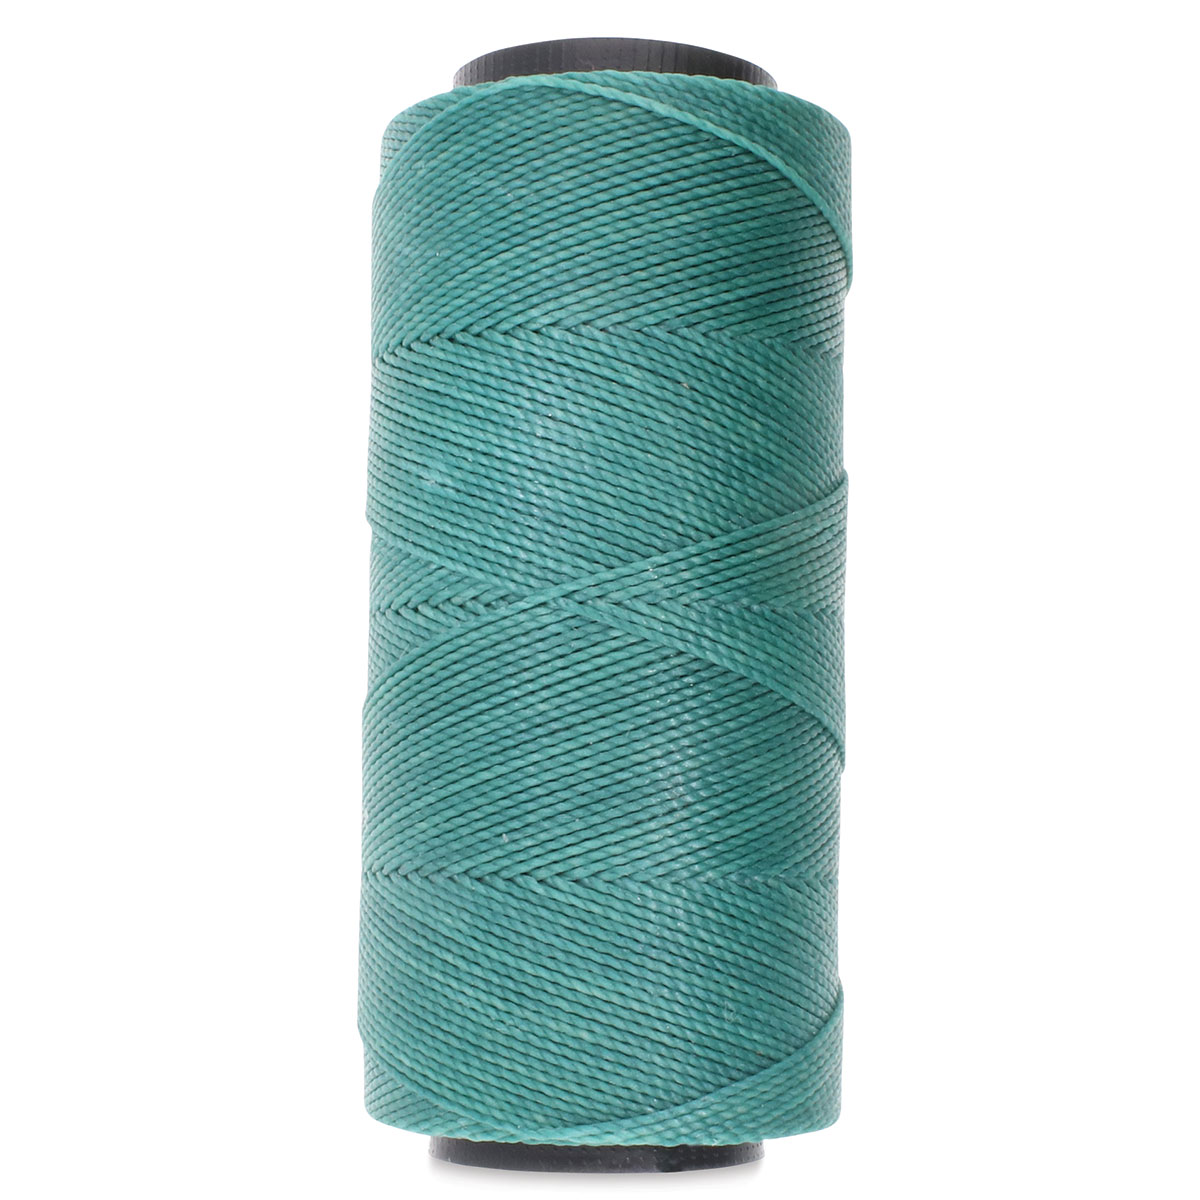 Waxed Polyester Cord by Settanyl and Linhasita